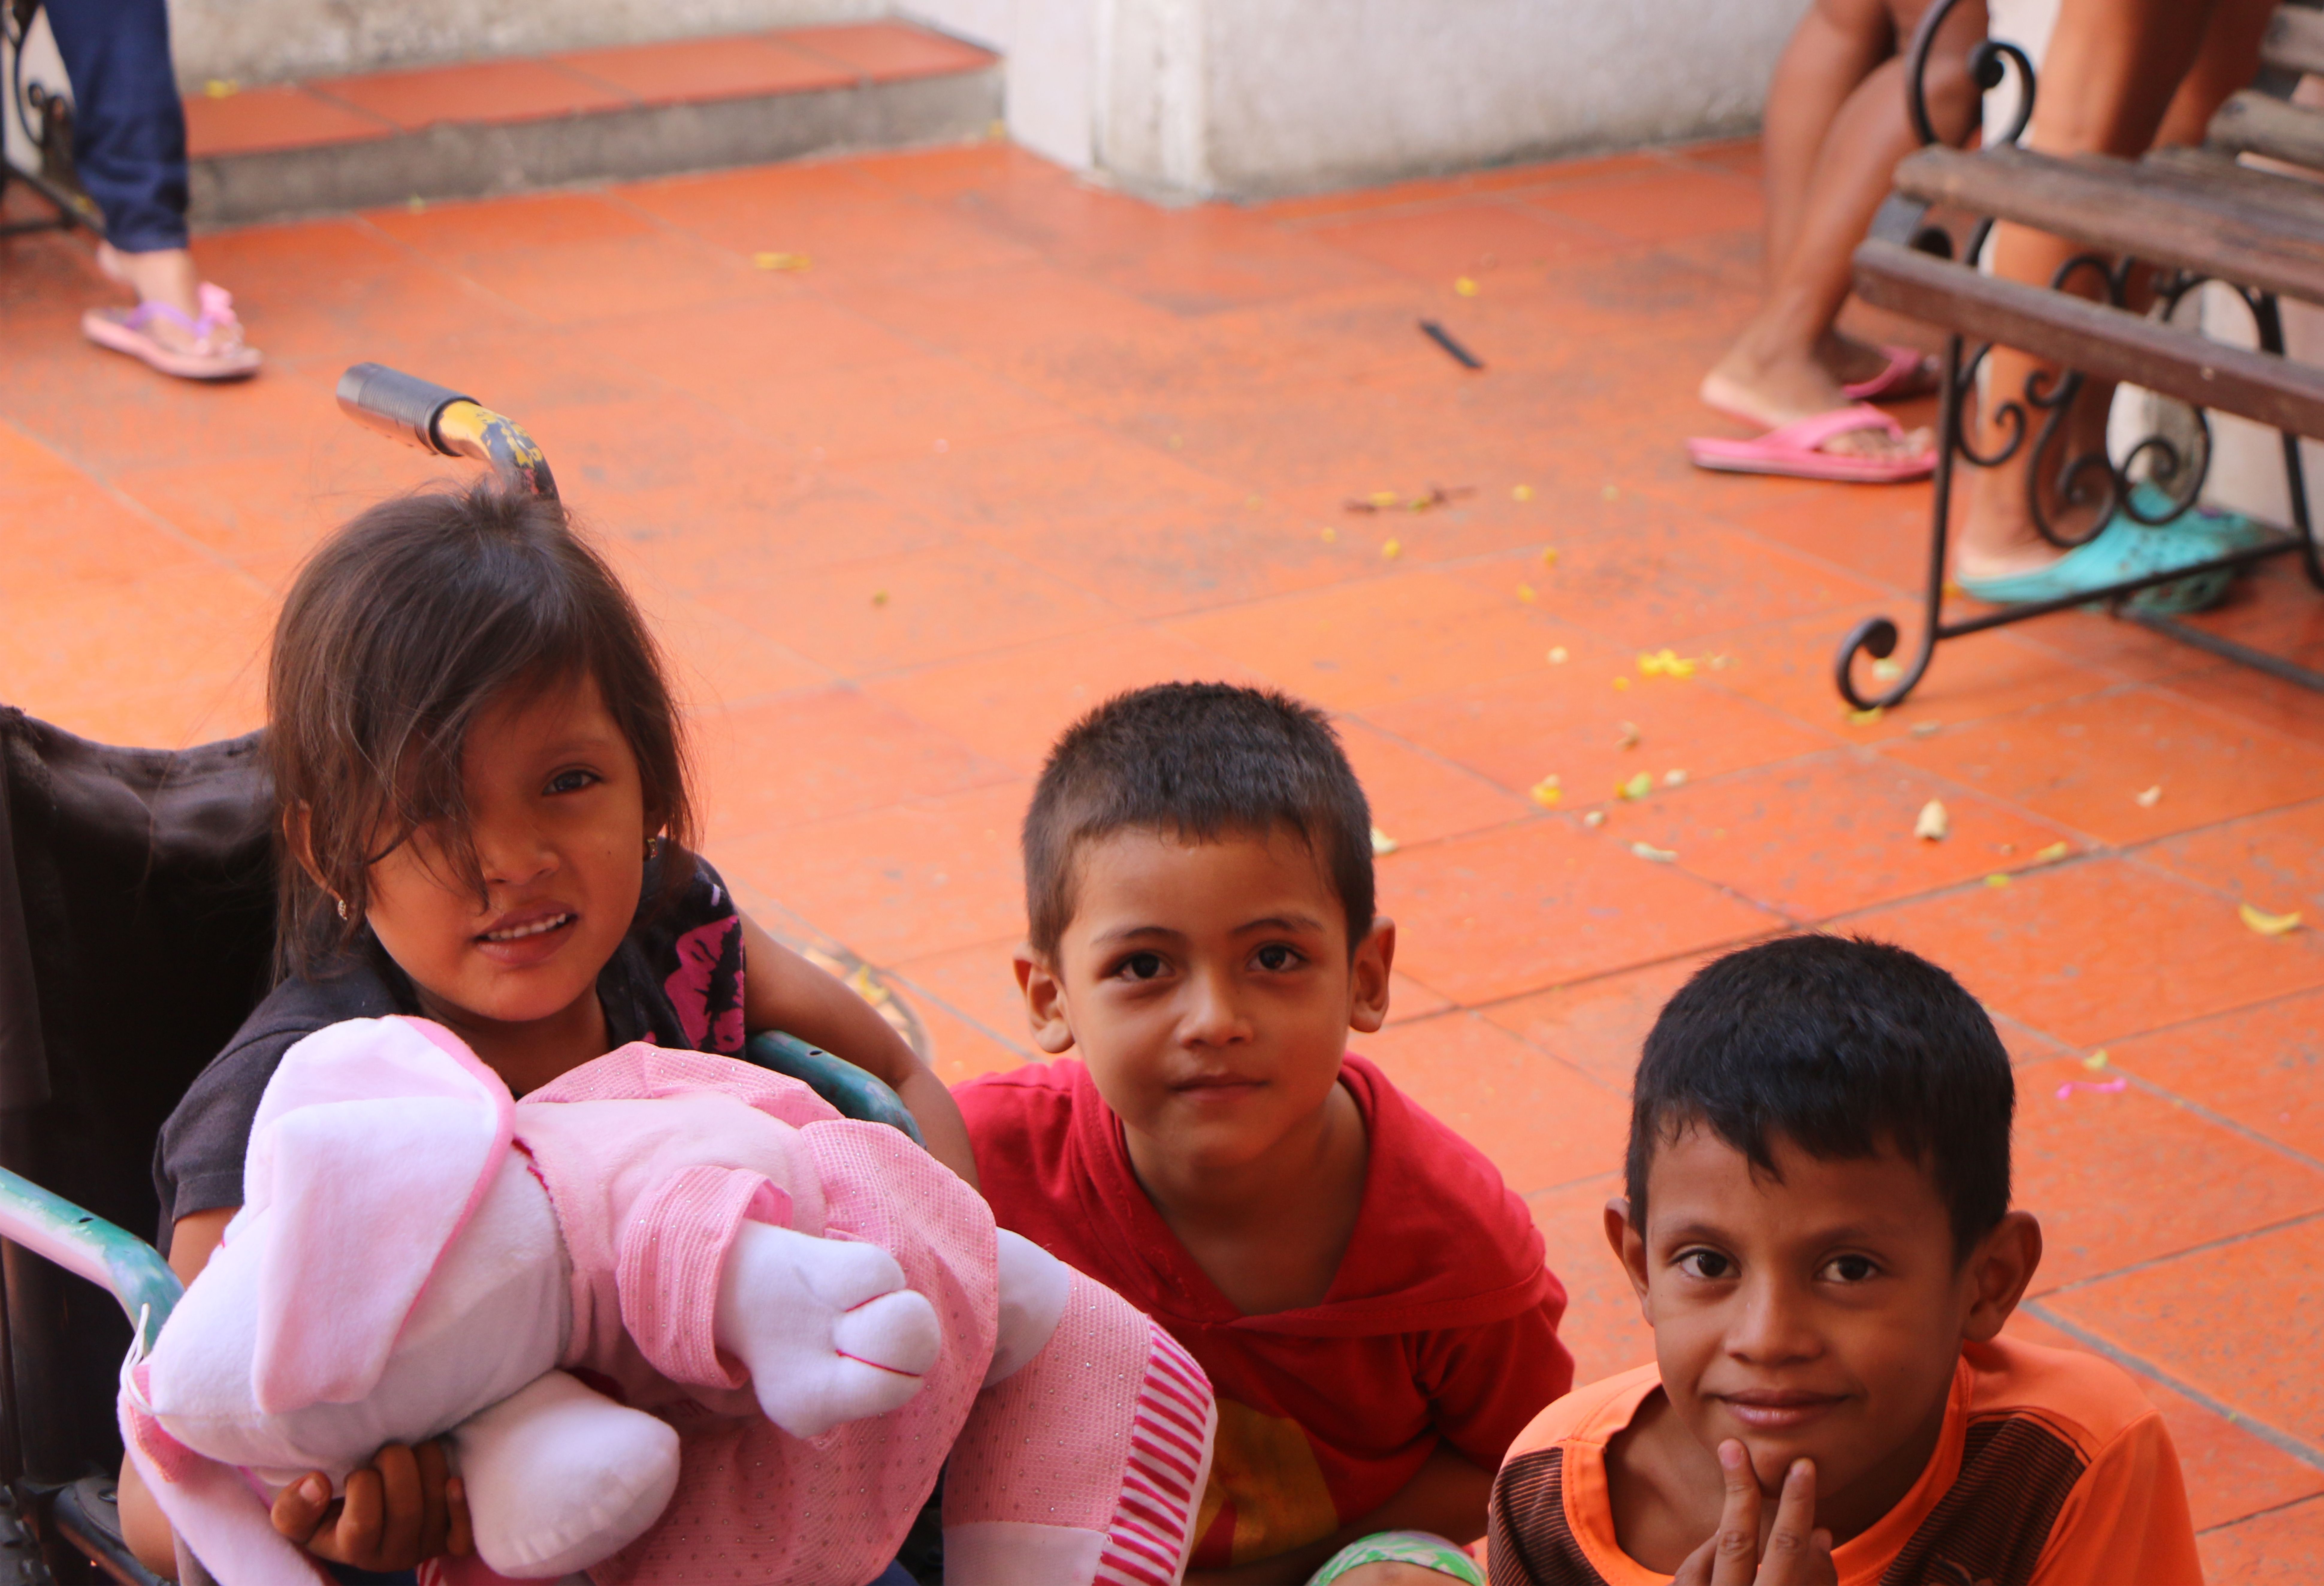 Children living in Fundación Hoasis in Cúcuta, Colombia. Image by Patrick Ammerman. Colombia, 2019.